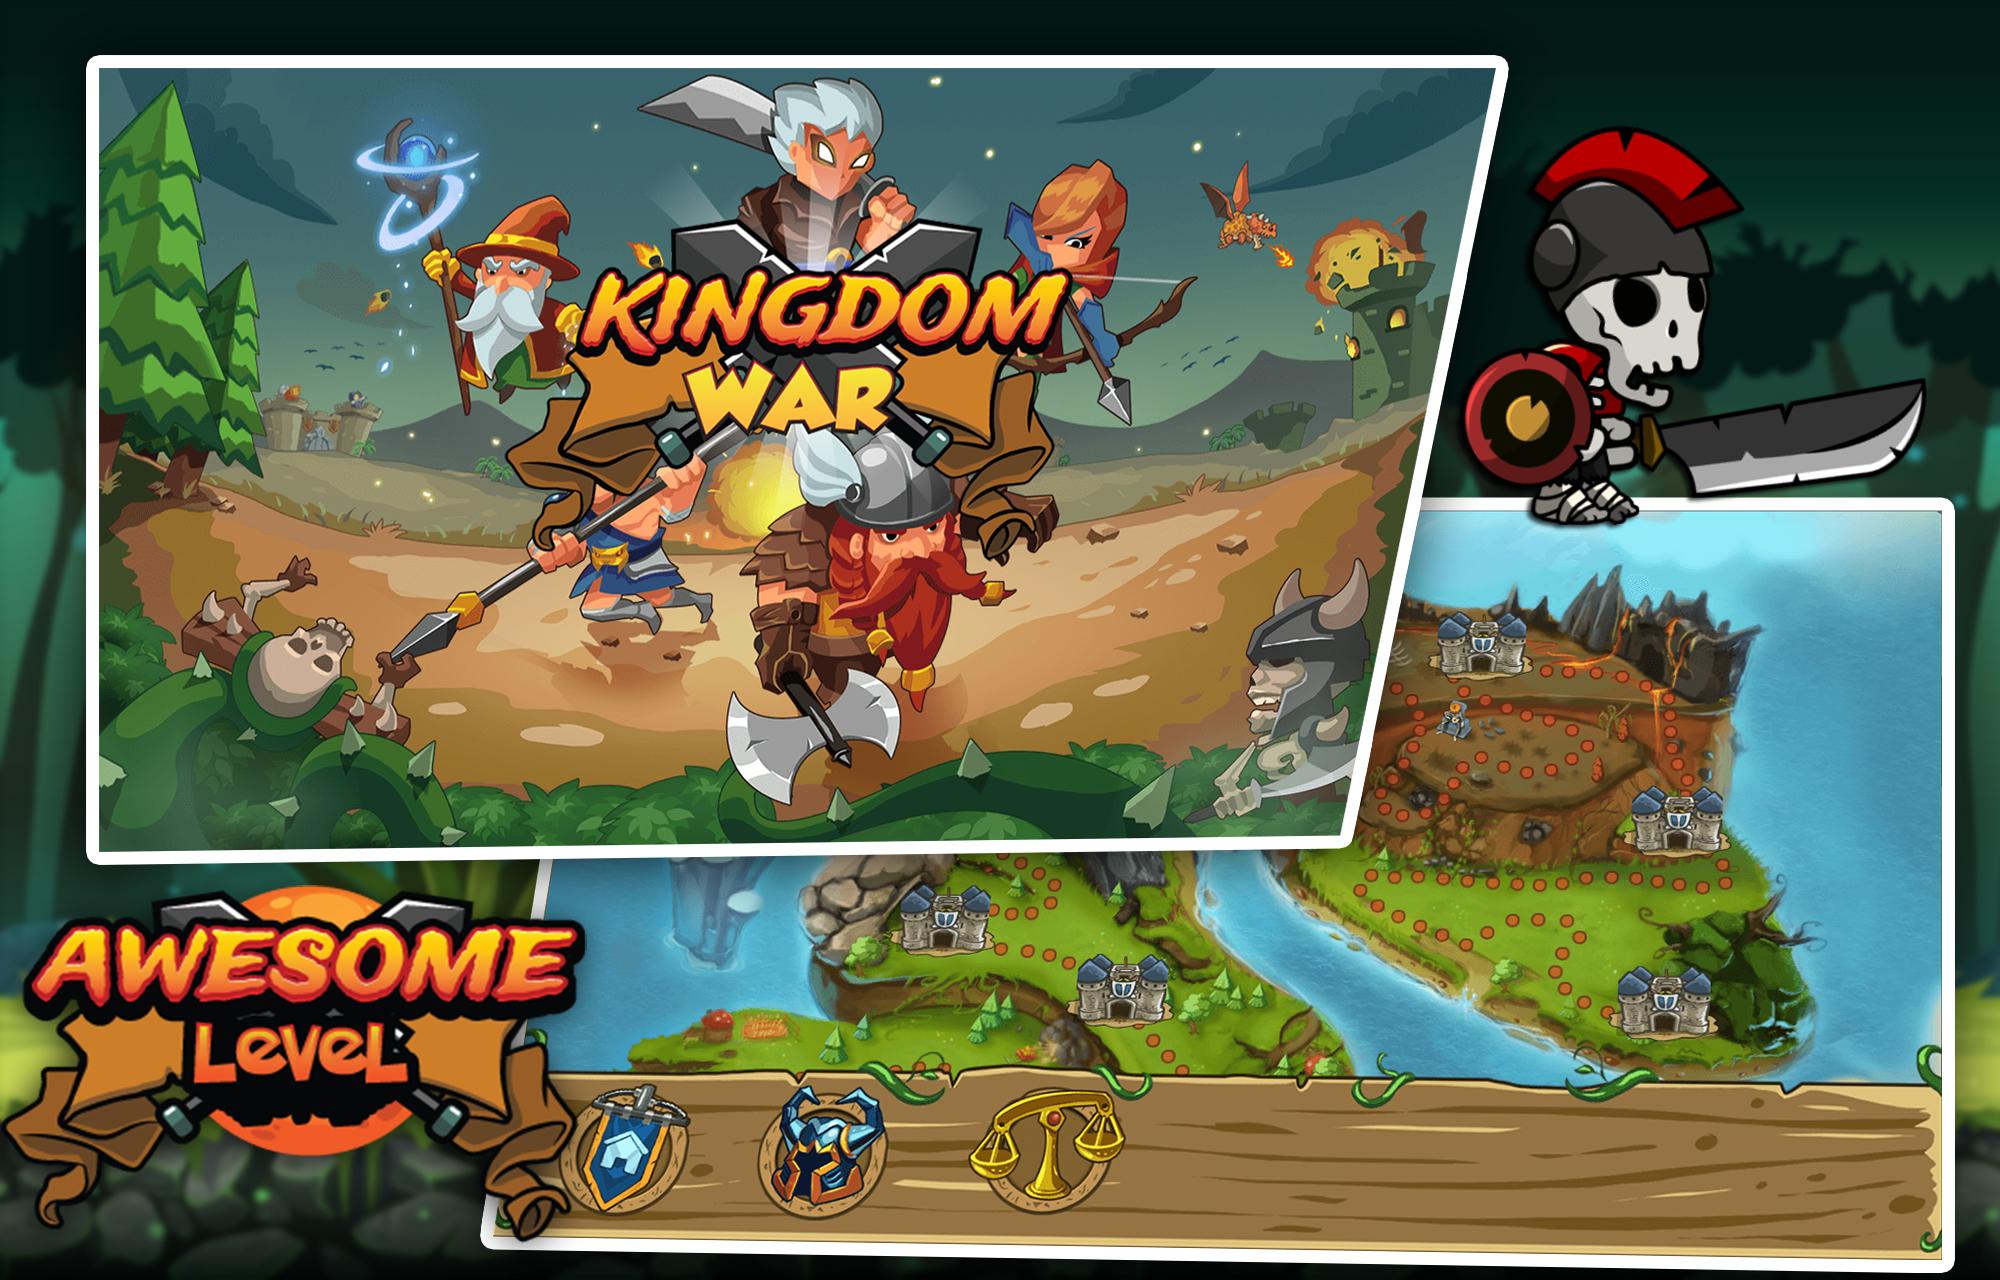 Kingdom War for Android - APK Download